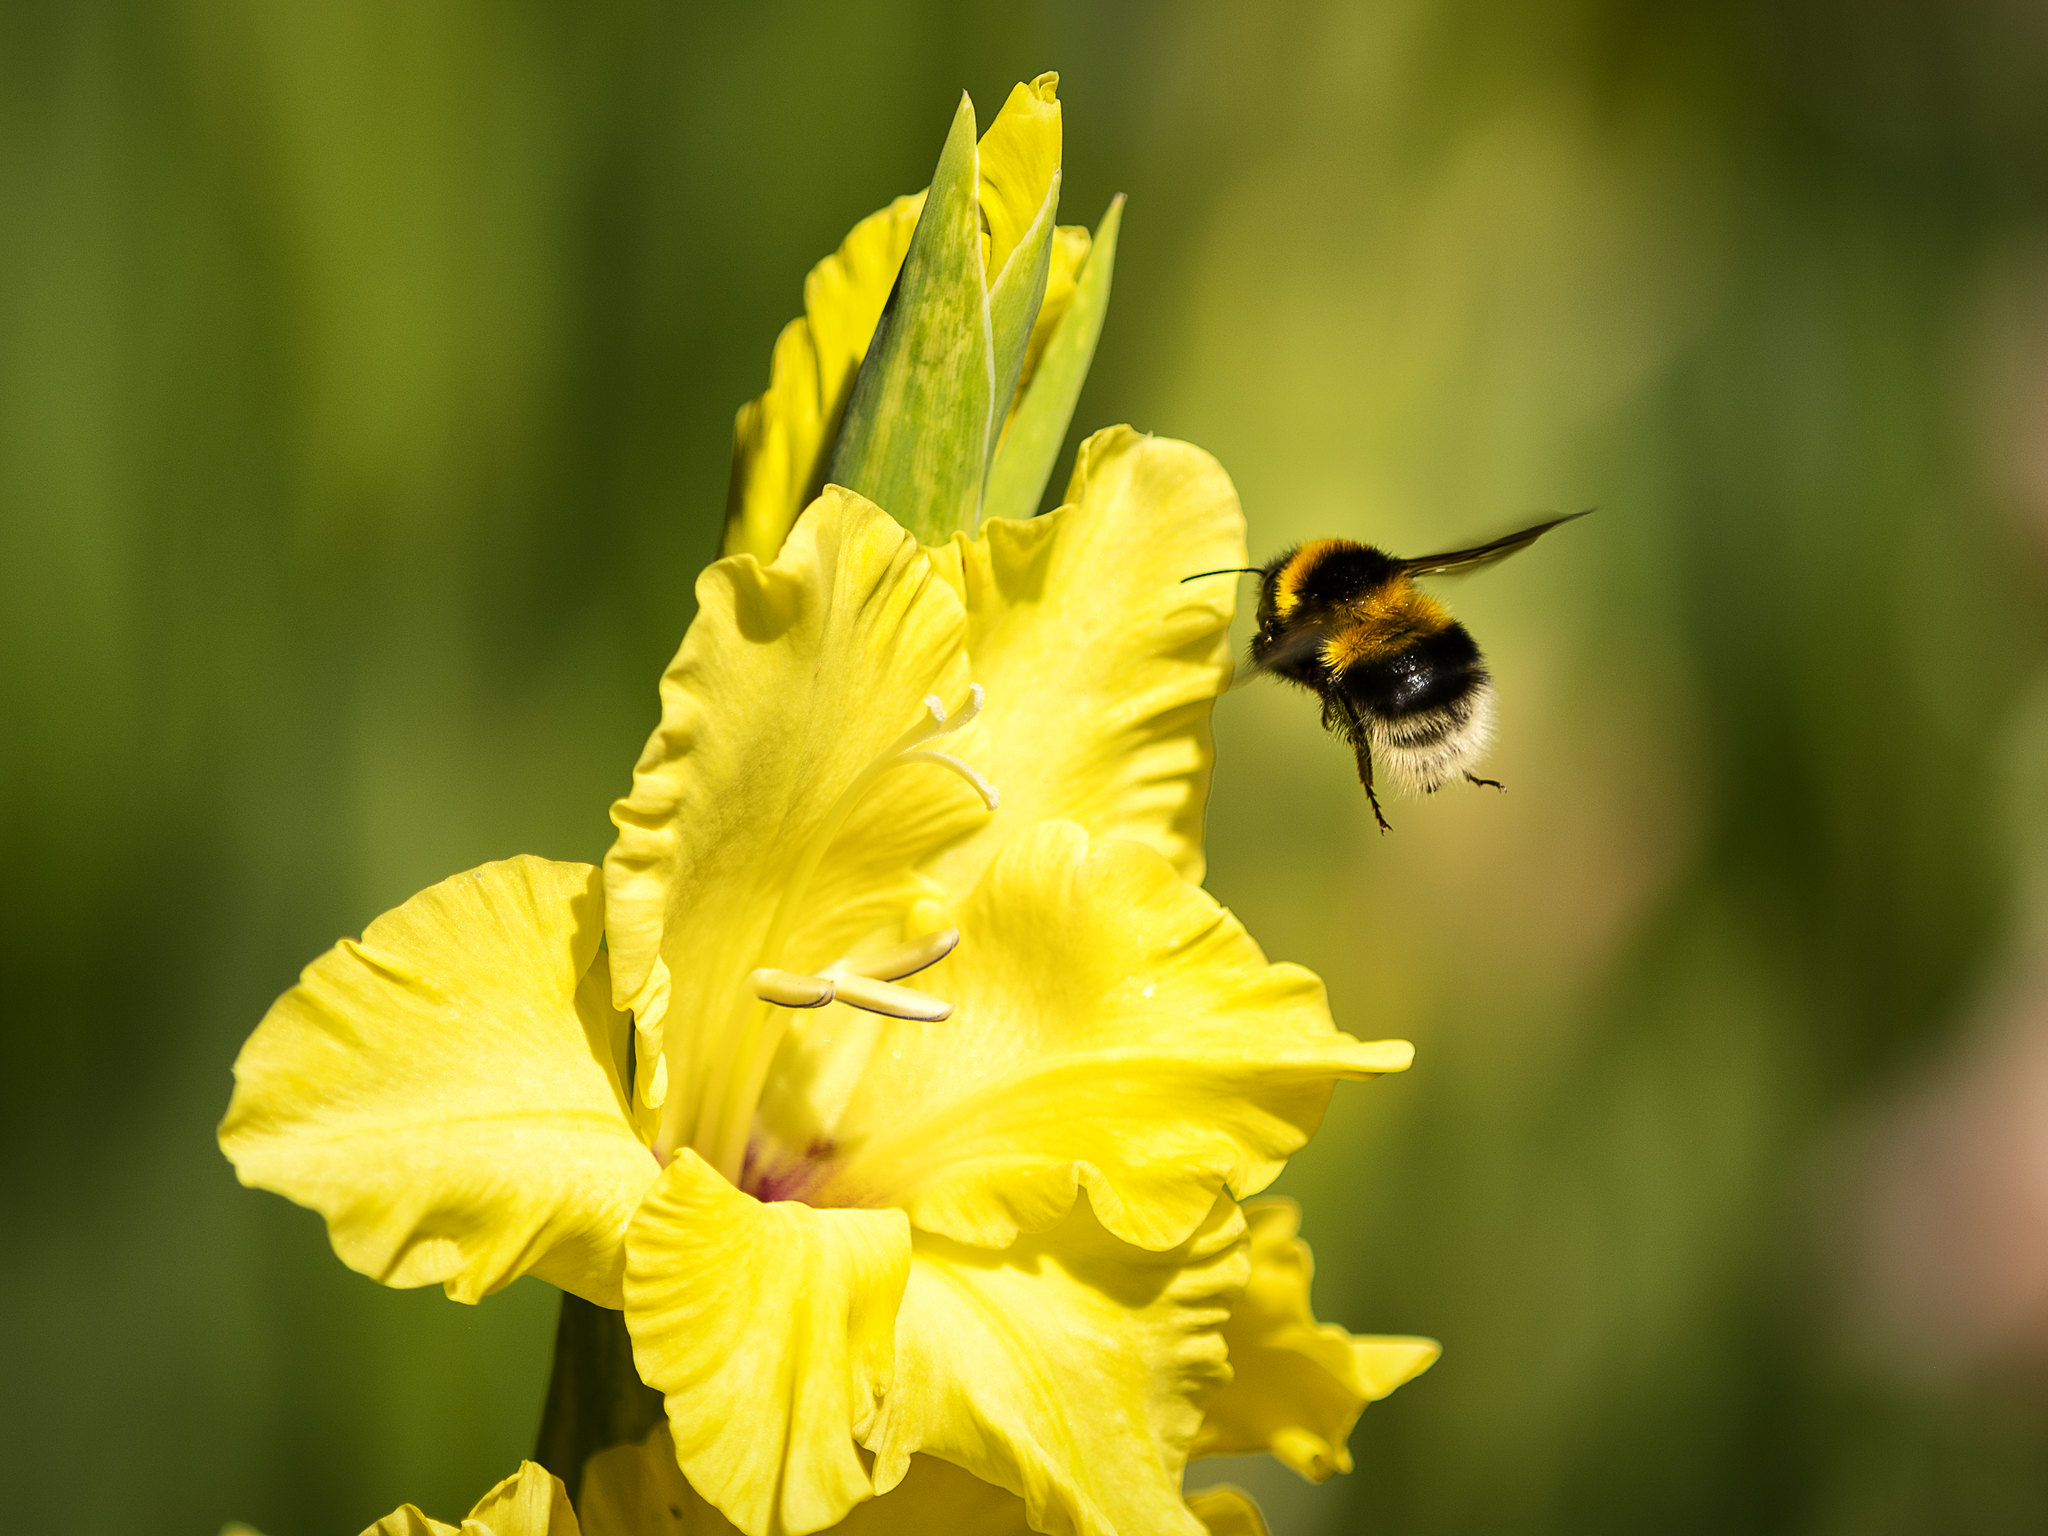 Photograph of a bumblebee flying towards a yellow flower. 